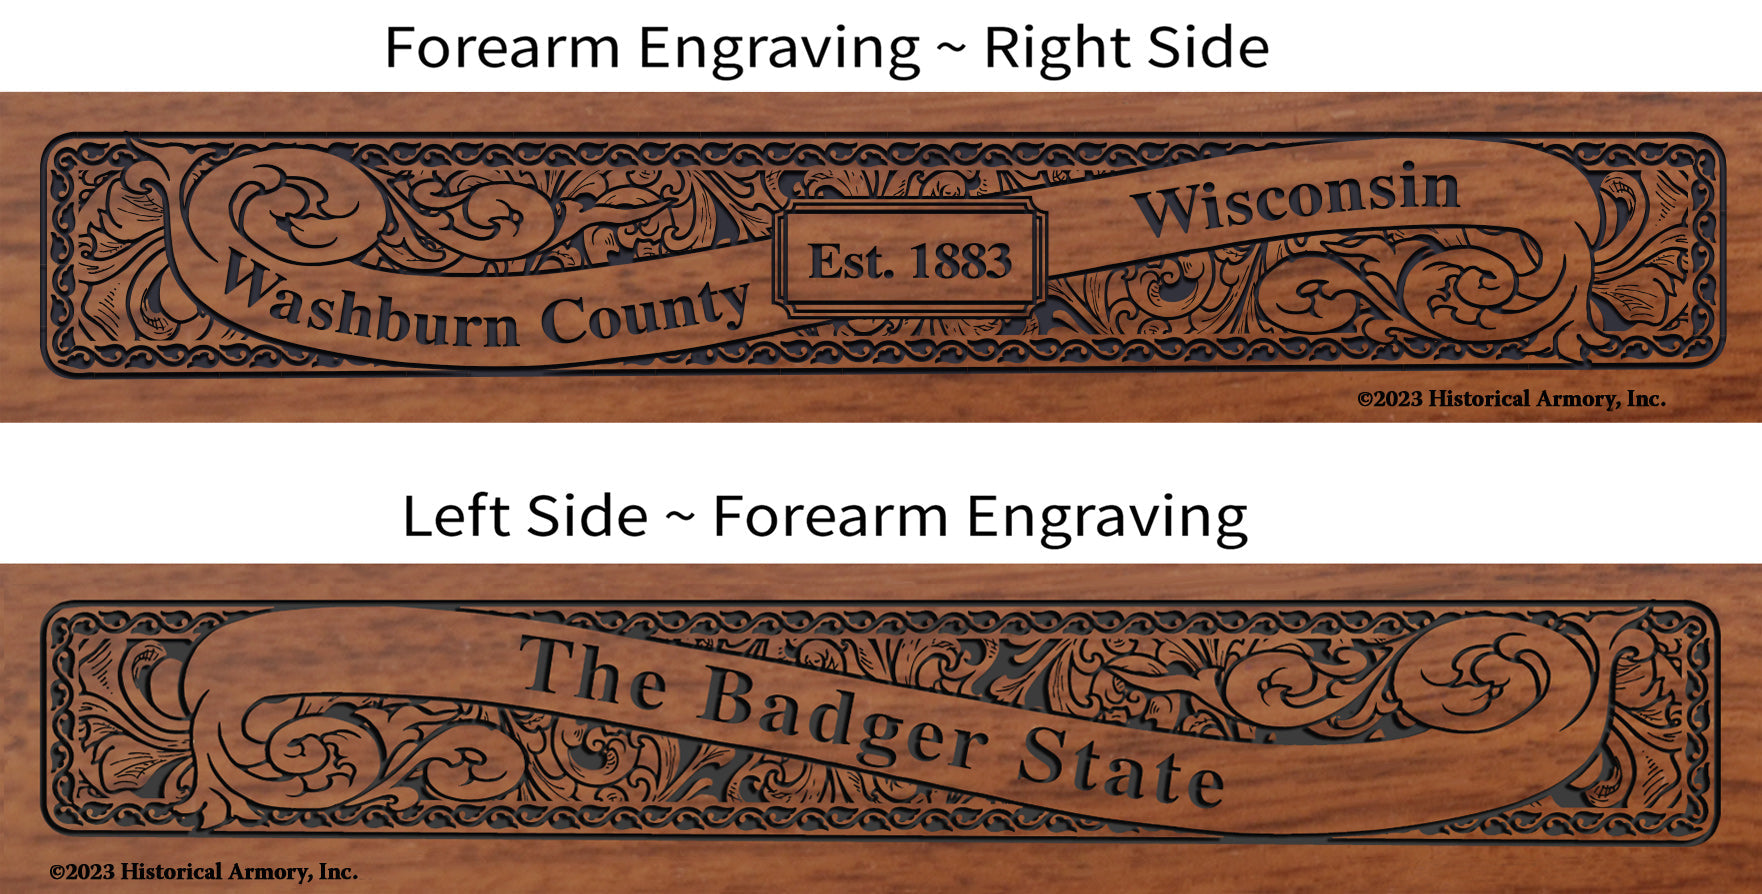 Washburn County Wisconsin Engraved Rifle Forearm